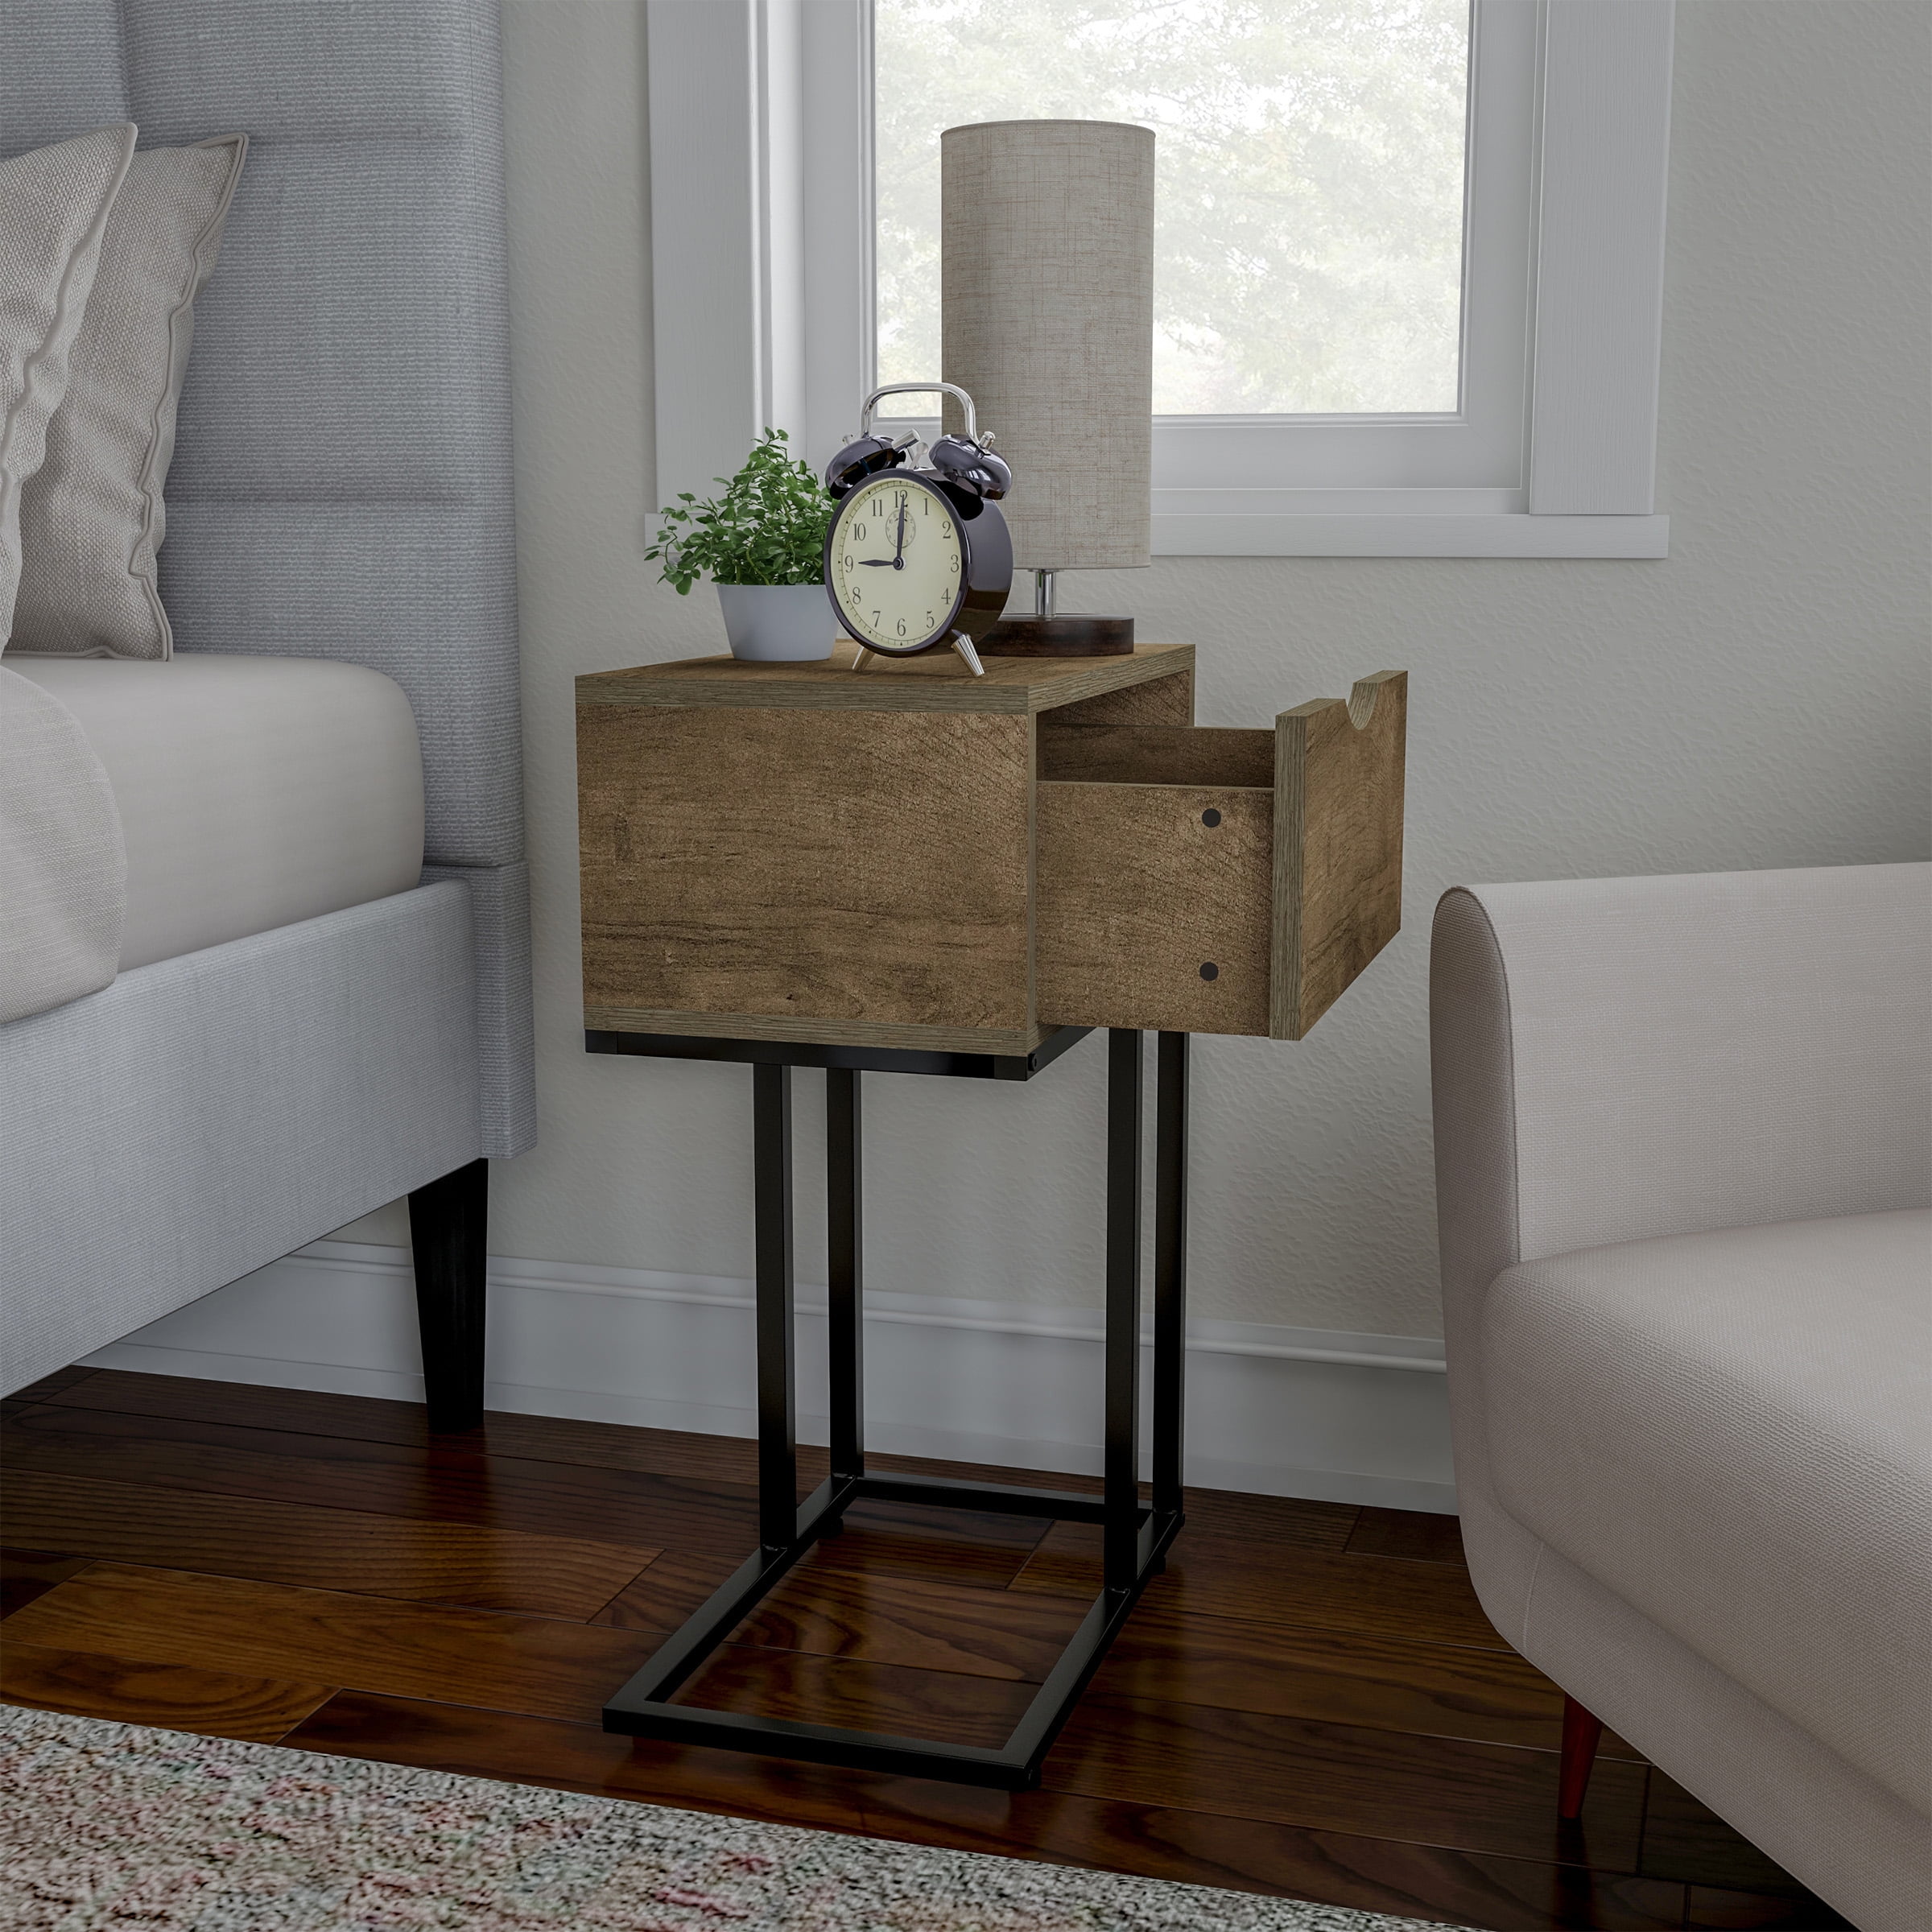 gezagvoerder verkopen diefstal Sofa Side Table- C Shaped End Table with Storage Drawer, Modern Farmhouse  or Rustic Style Laptop Tray, Slide Under Couch or Bed by Lavish Home (Gray)  - Walmart.com